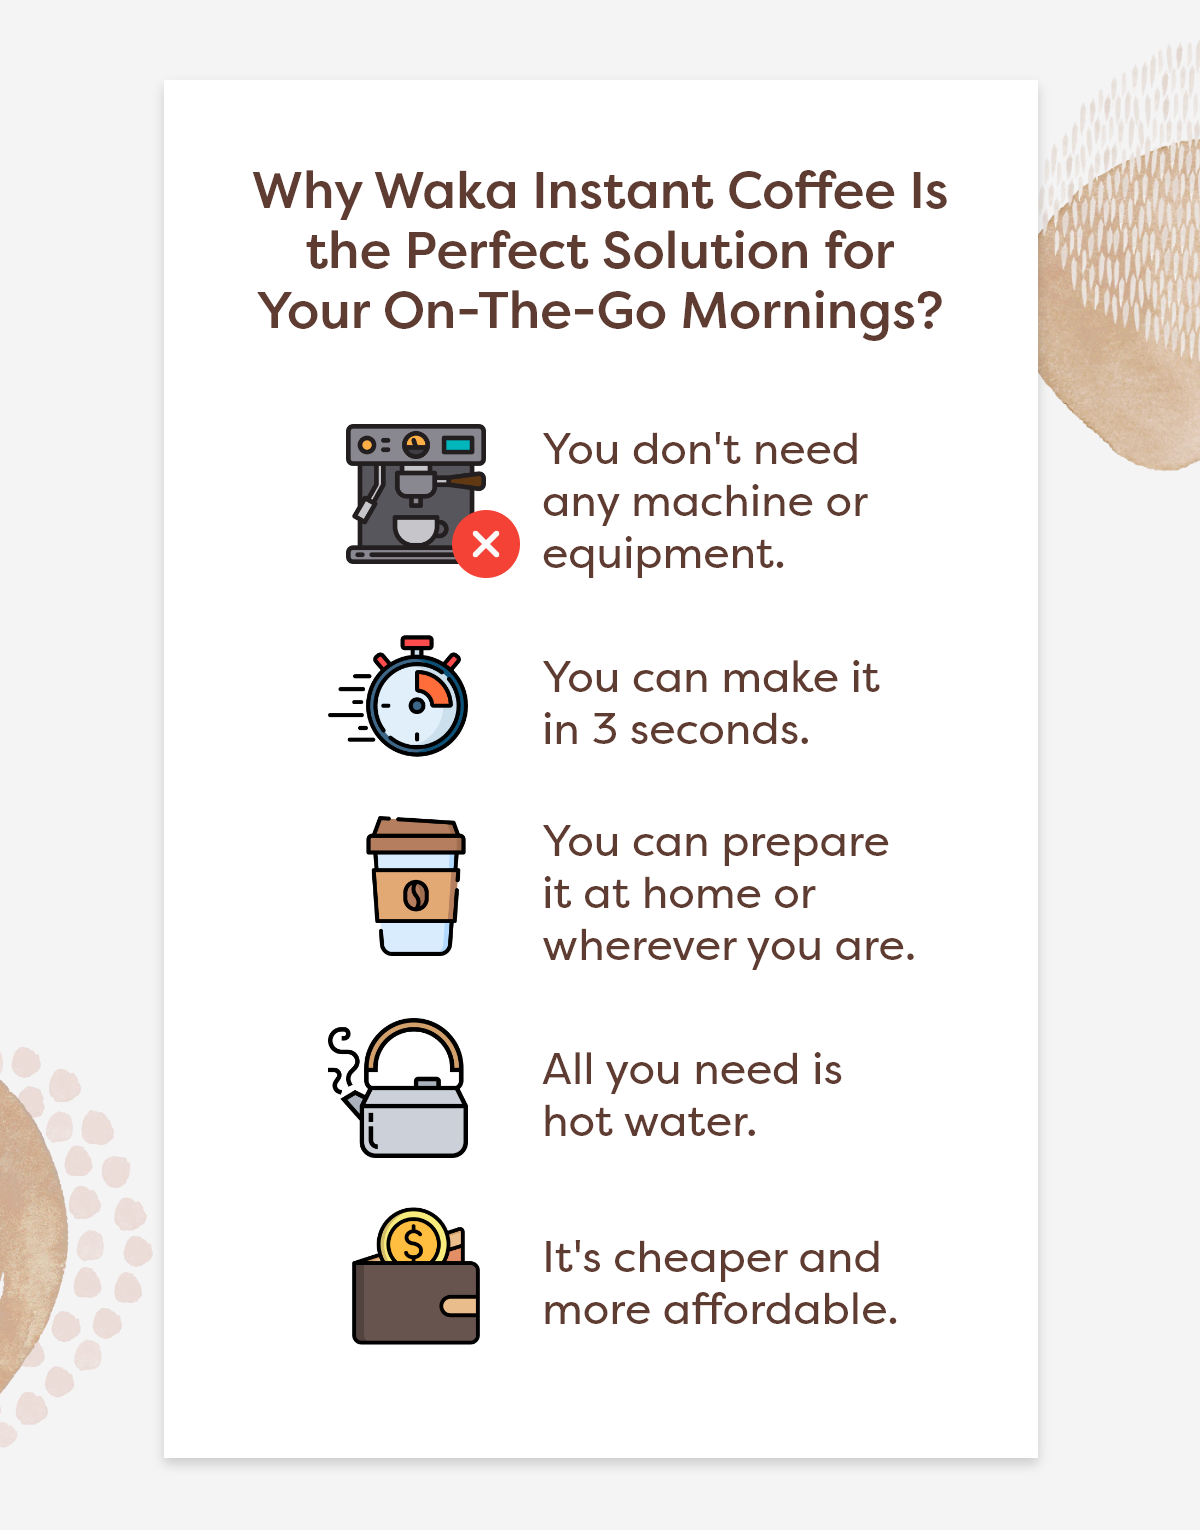 Why Waka Instant Coffee Is the Perfect Solution for Your On-The-Go Mornings?  1.You don't need any machine or equipment. 2.You can make it in 3 seconds. 3.You can prepare it at home or wherever you are. 4.All you need is hot water. 5.It's cheaper and more affordable.